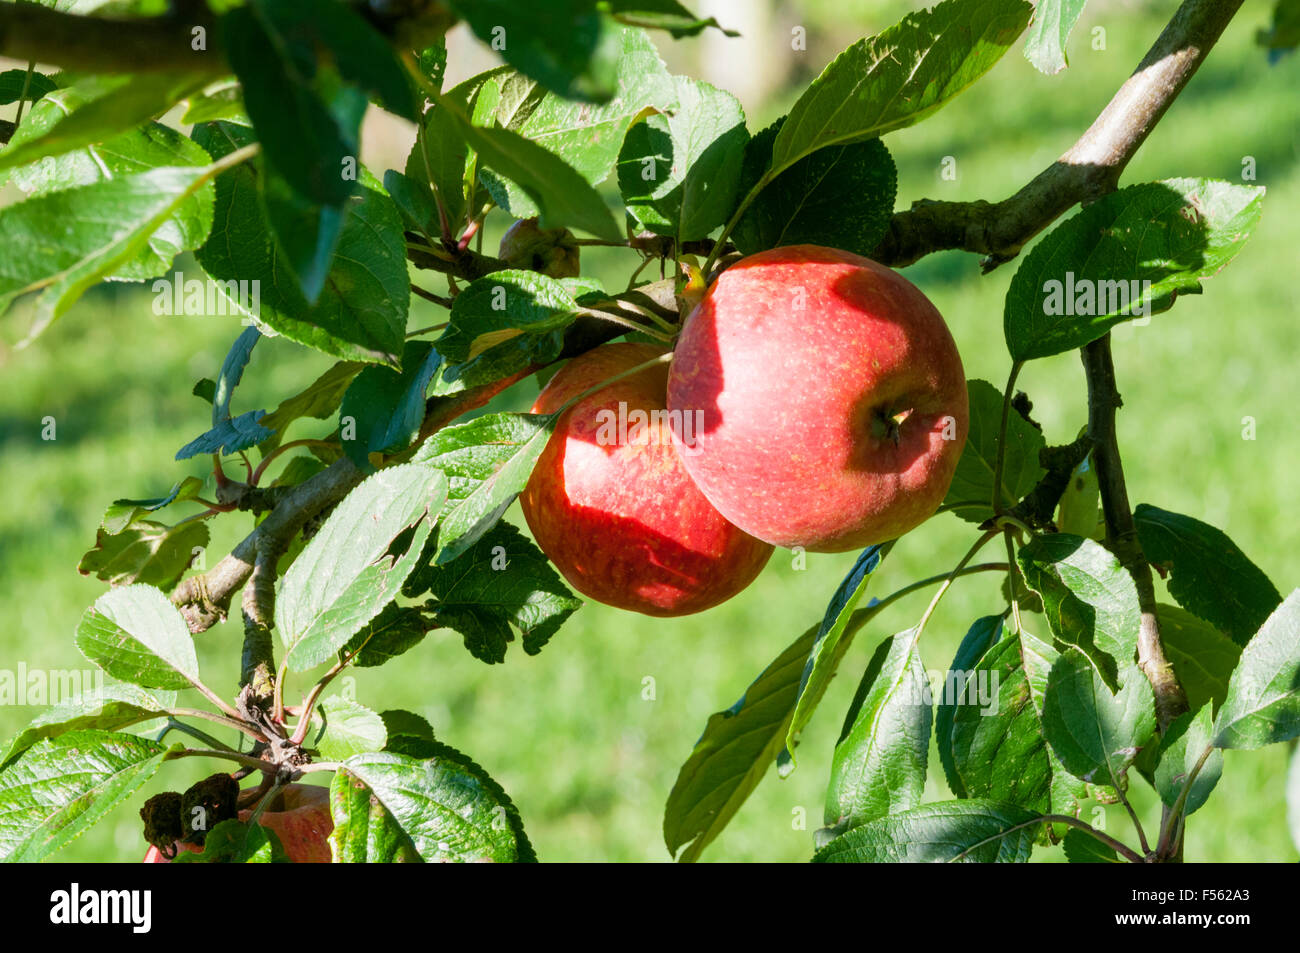 Two apples of the variety Kidd's Orange Red growing on a tree. Stock Photo